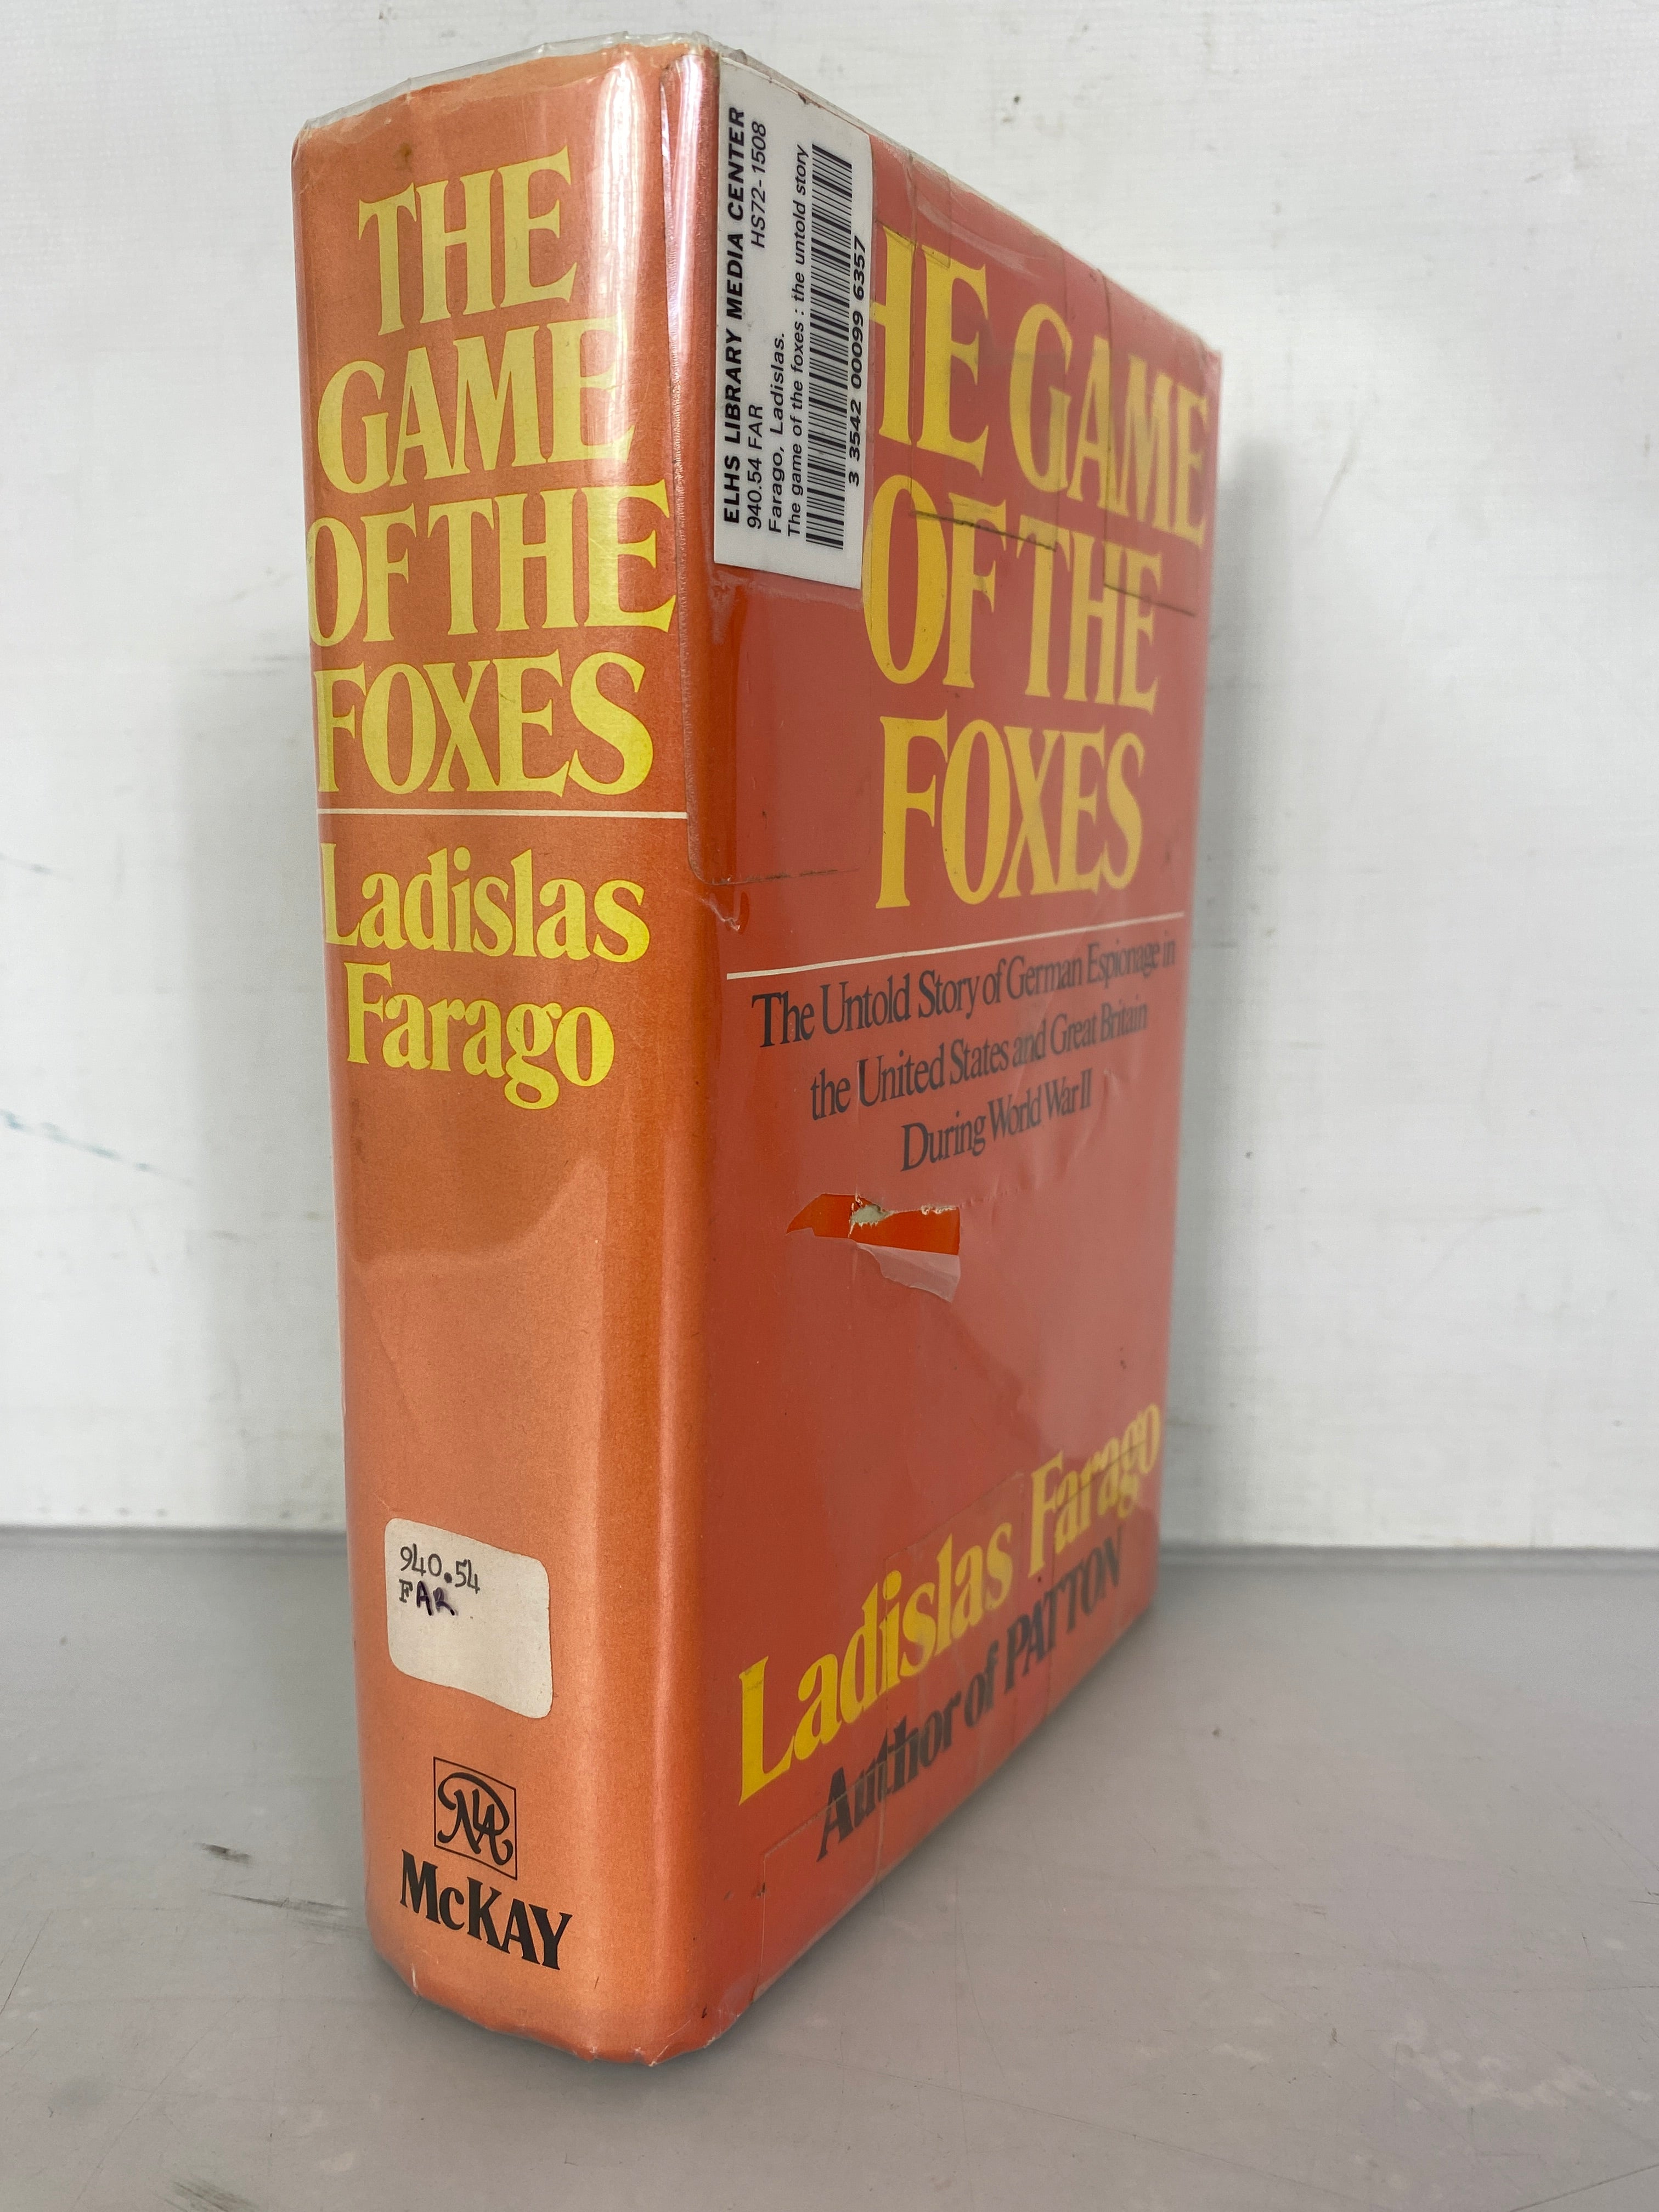 Lot of 2 The Game of the Foxes 1971 / The Broken Seal 1967 Ladislas Farago HC DJ